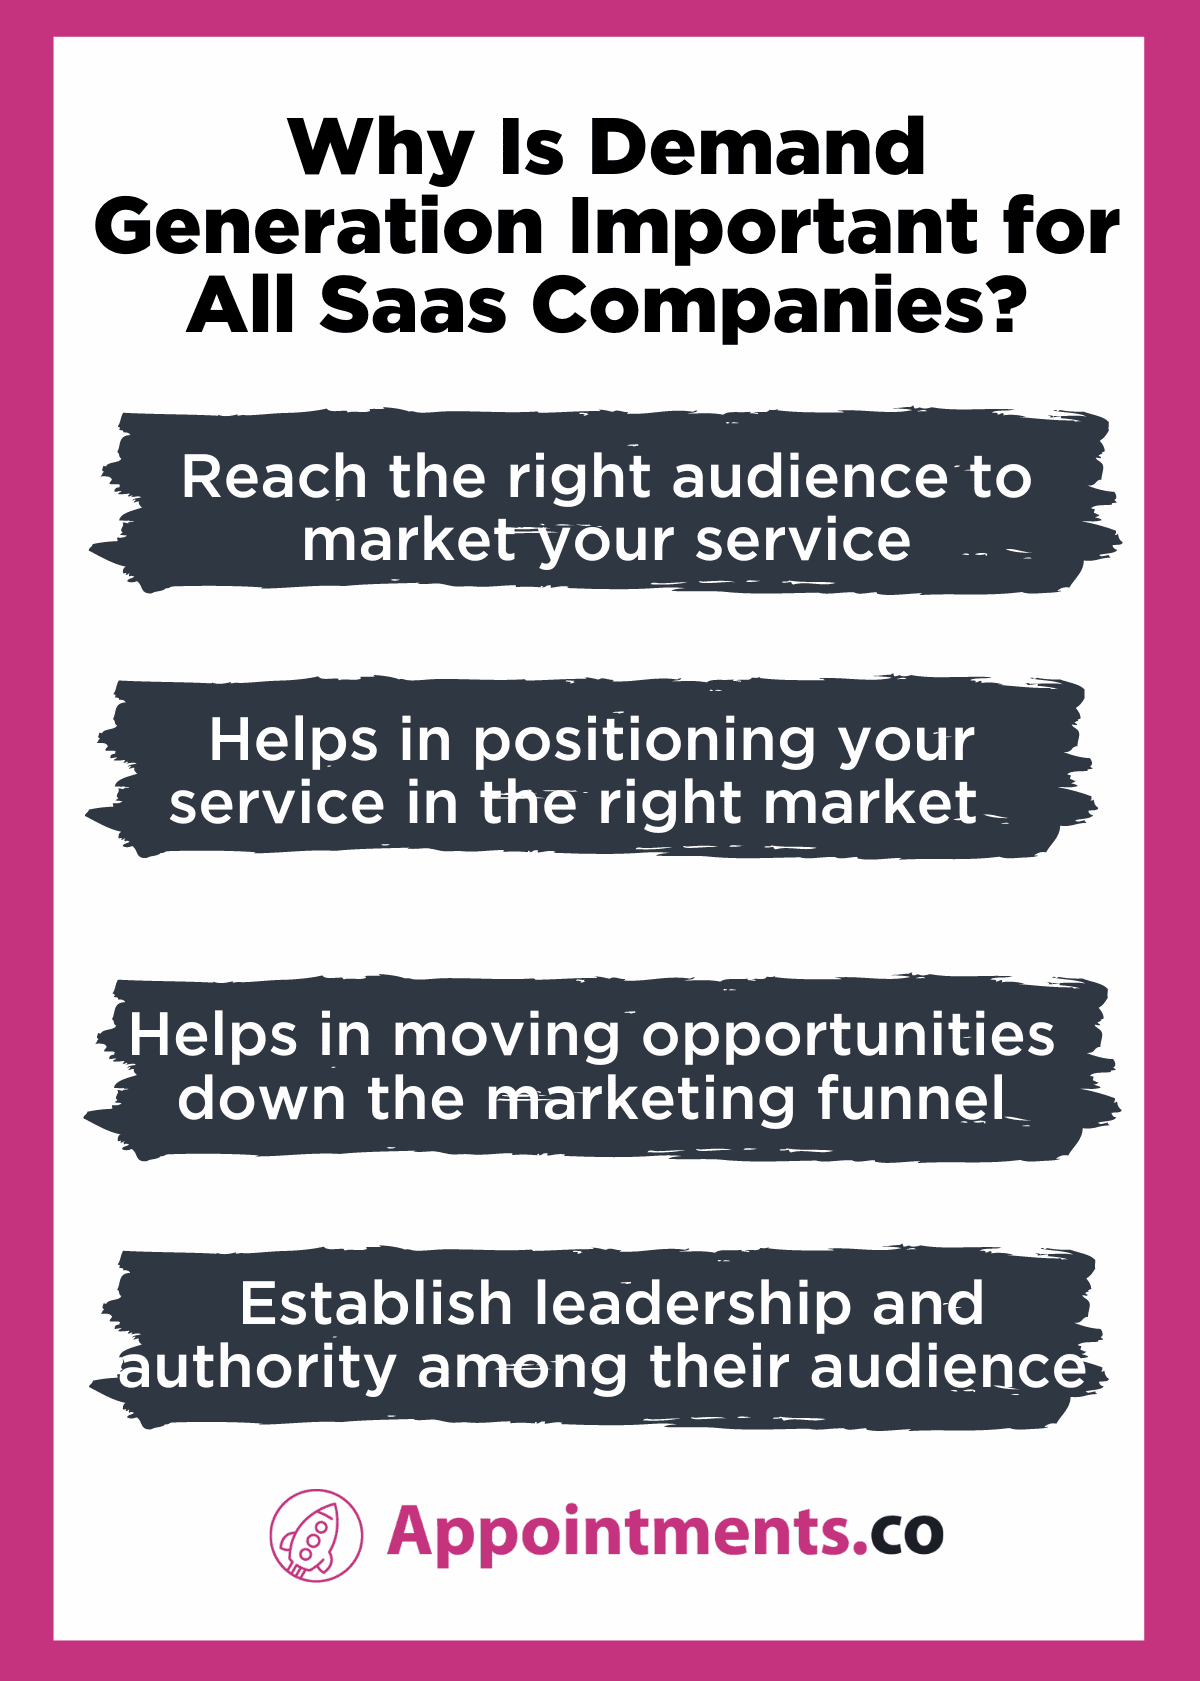 Why Is SaaS Demand Generation Important for All Saas Companies?